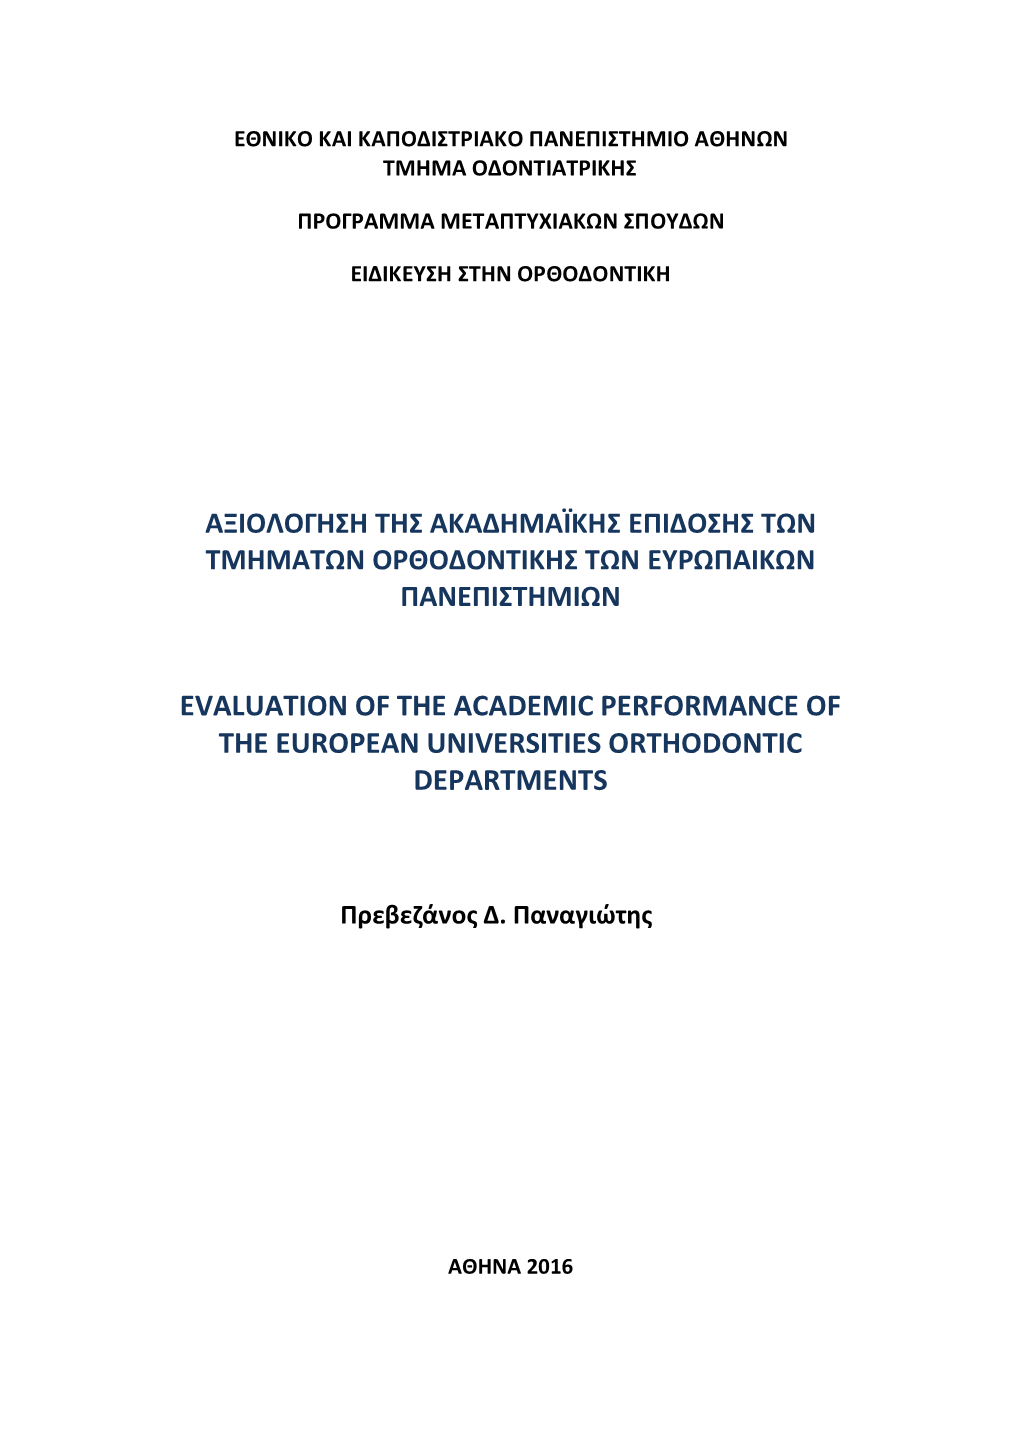 Evaluation of the Academic Performance of the European Universities Orthodontic Departments